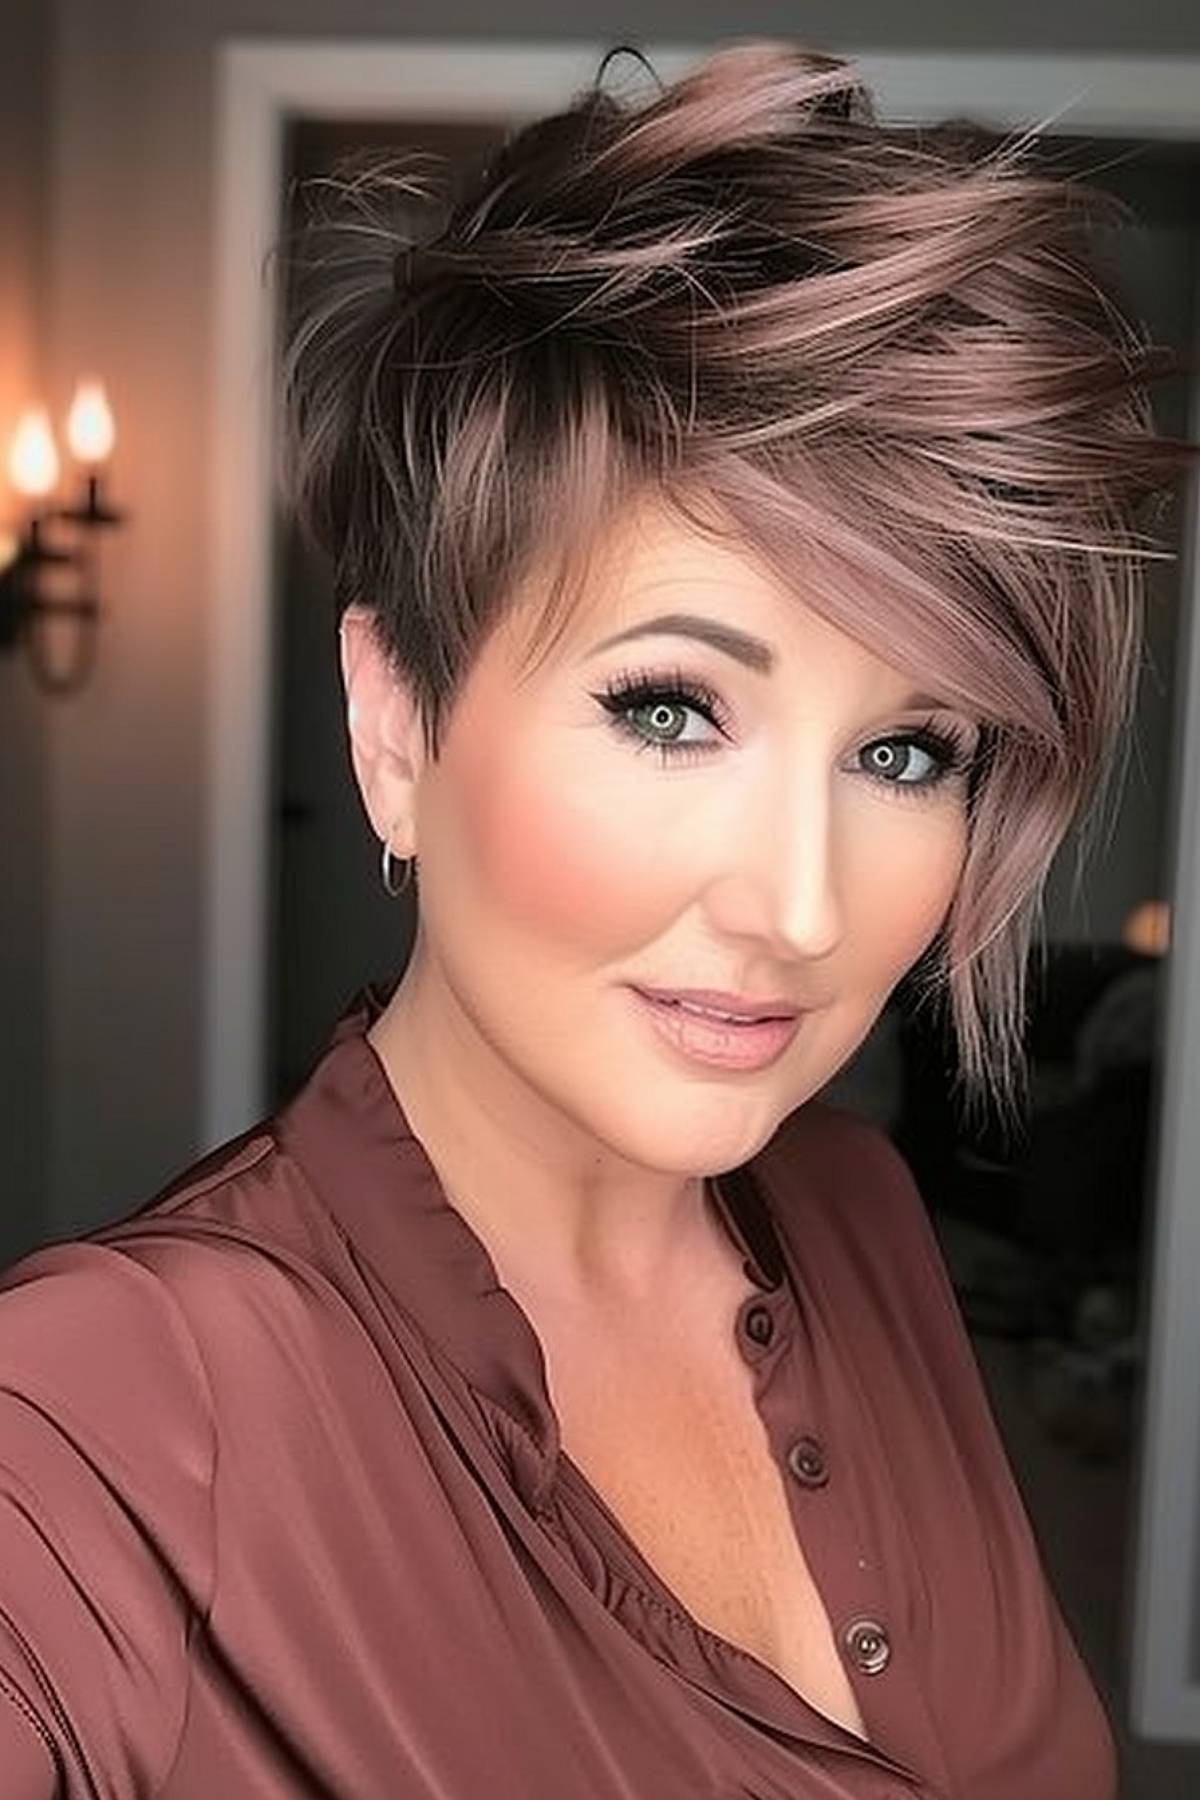 A woman with a diagonal pixie cut and irregular layers gives the hairstyle depth, volume and texture.